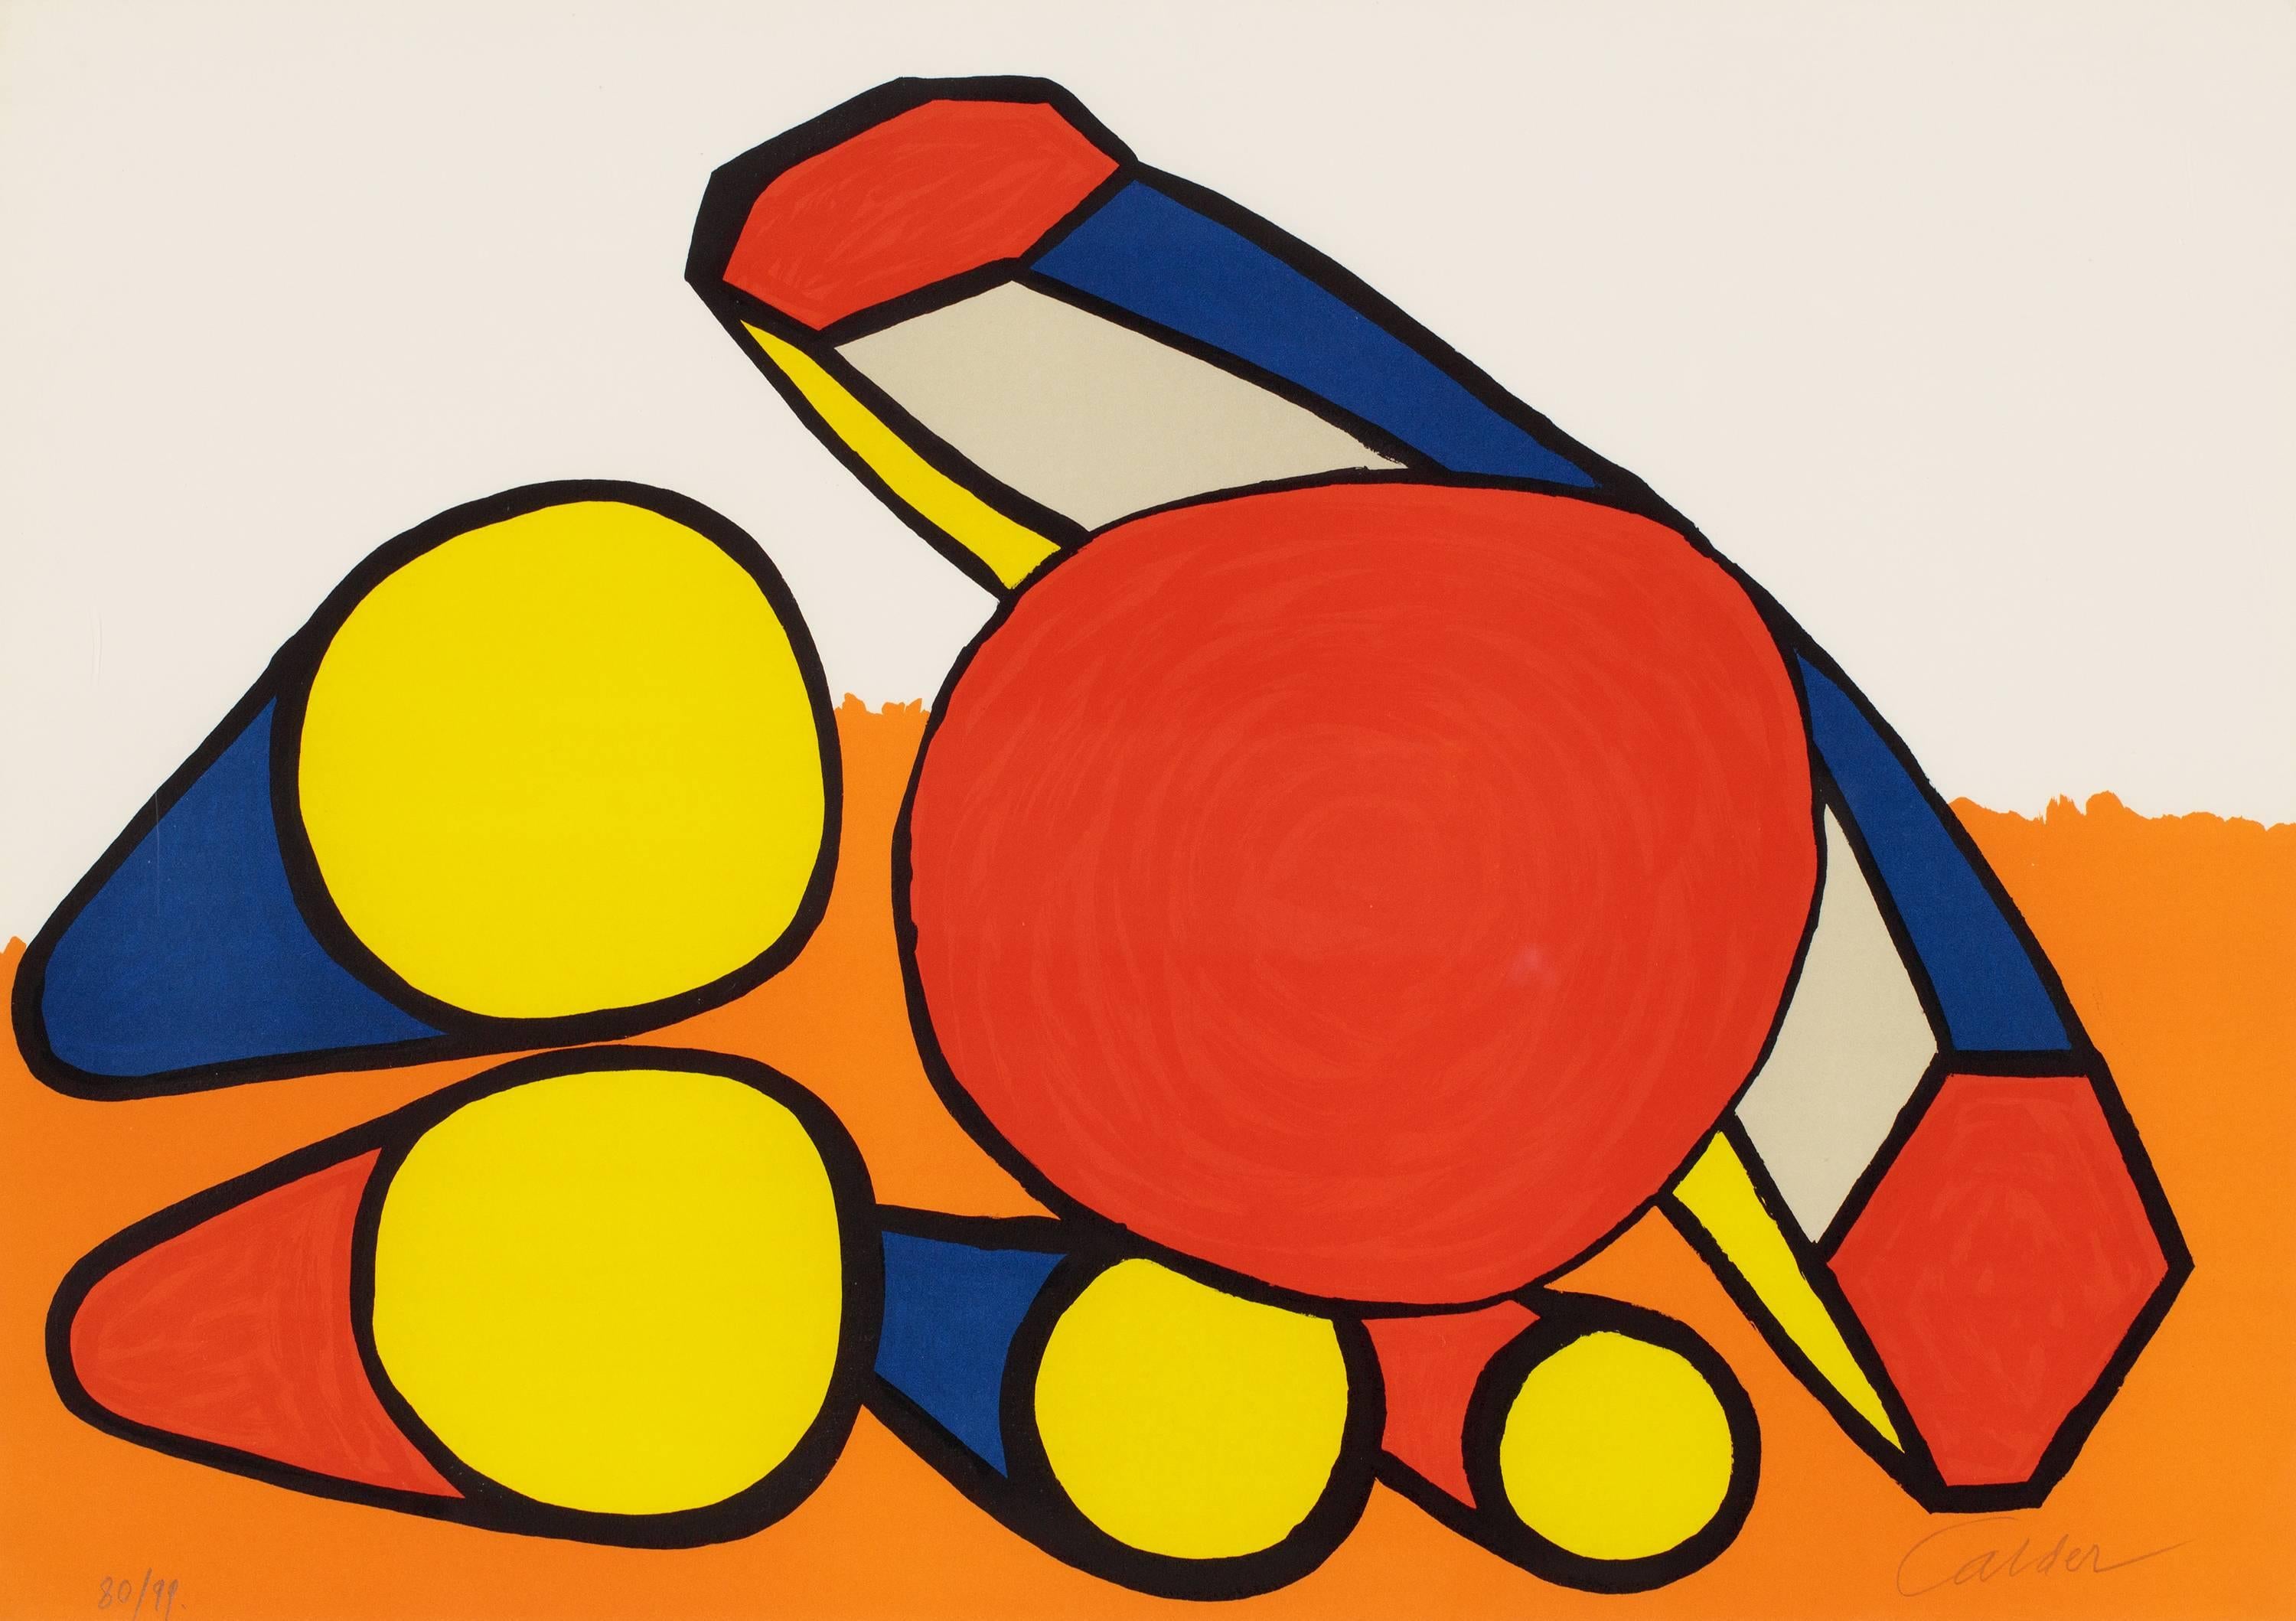 Alexander Calder Abstract Print - Composition with Circles and Tubes